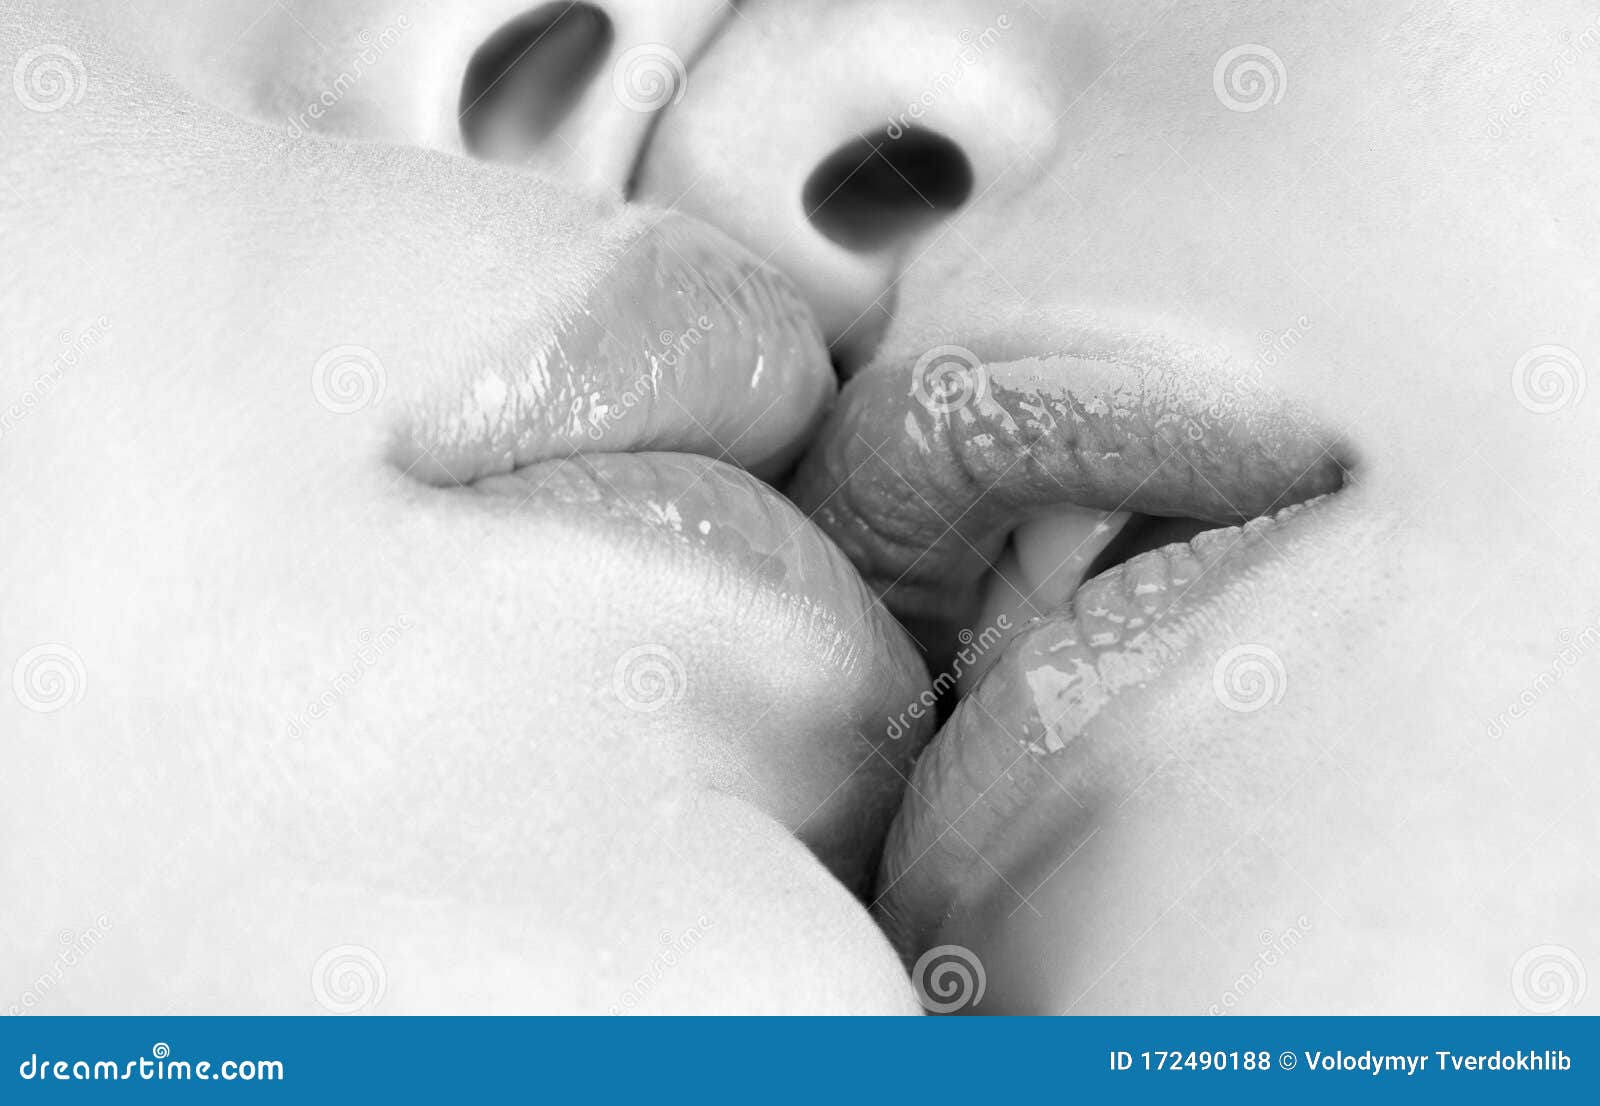 Lesbian Couple Together Concept. Kiss Lesson. Two Women Friends Kissing.  Two Beautiful Lesbians in Love Stock Photo - Image of desire, facekissing:  172490188